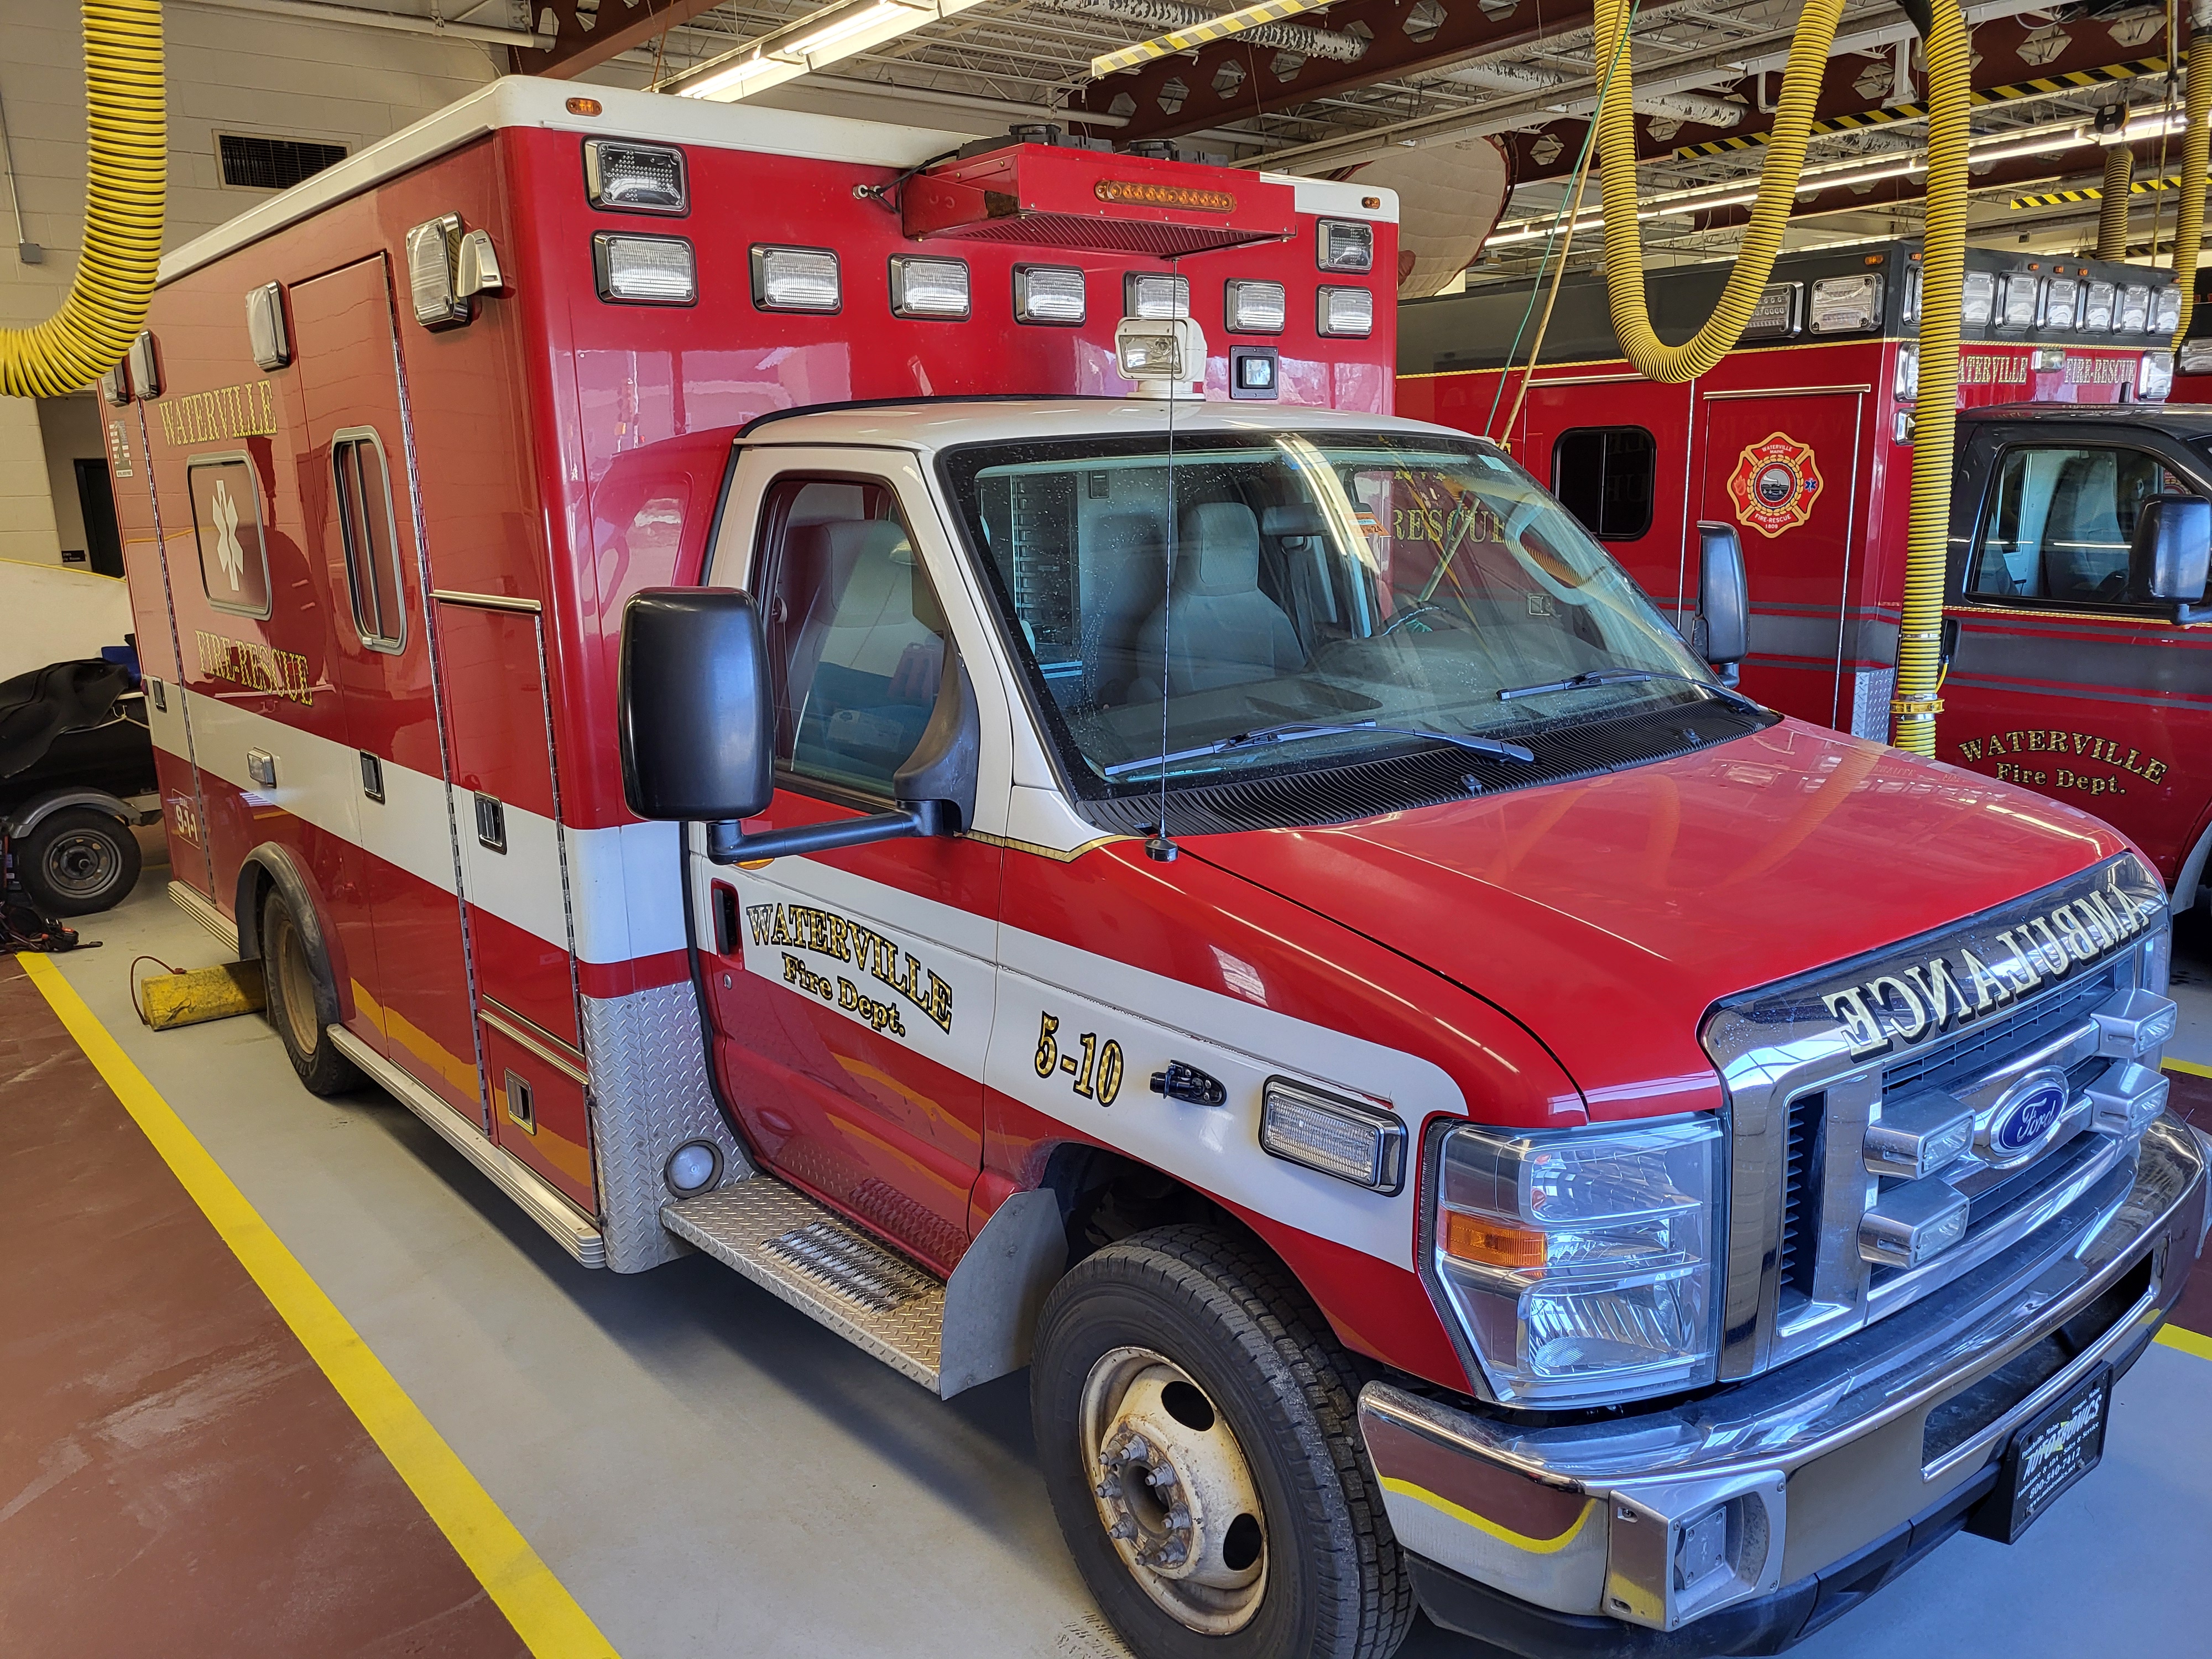 Picture of ambulance 510